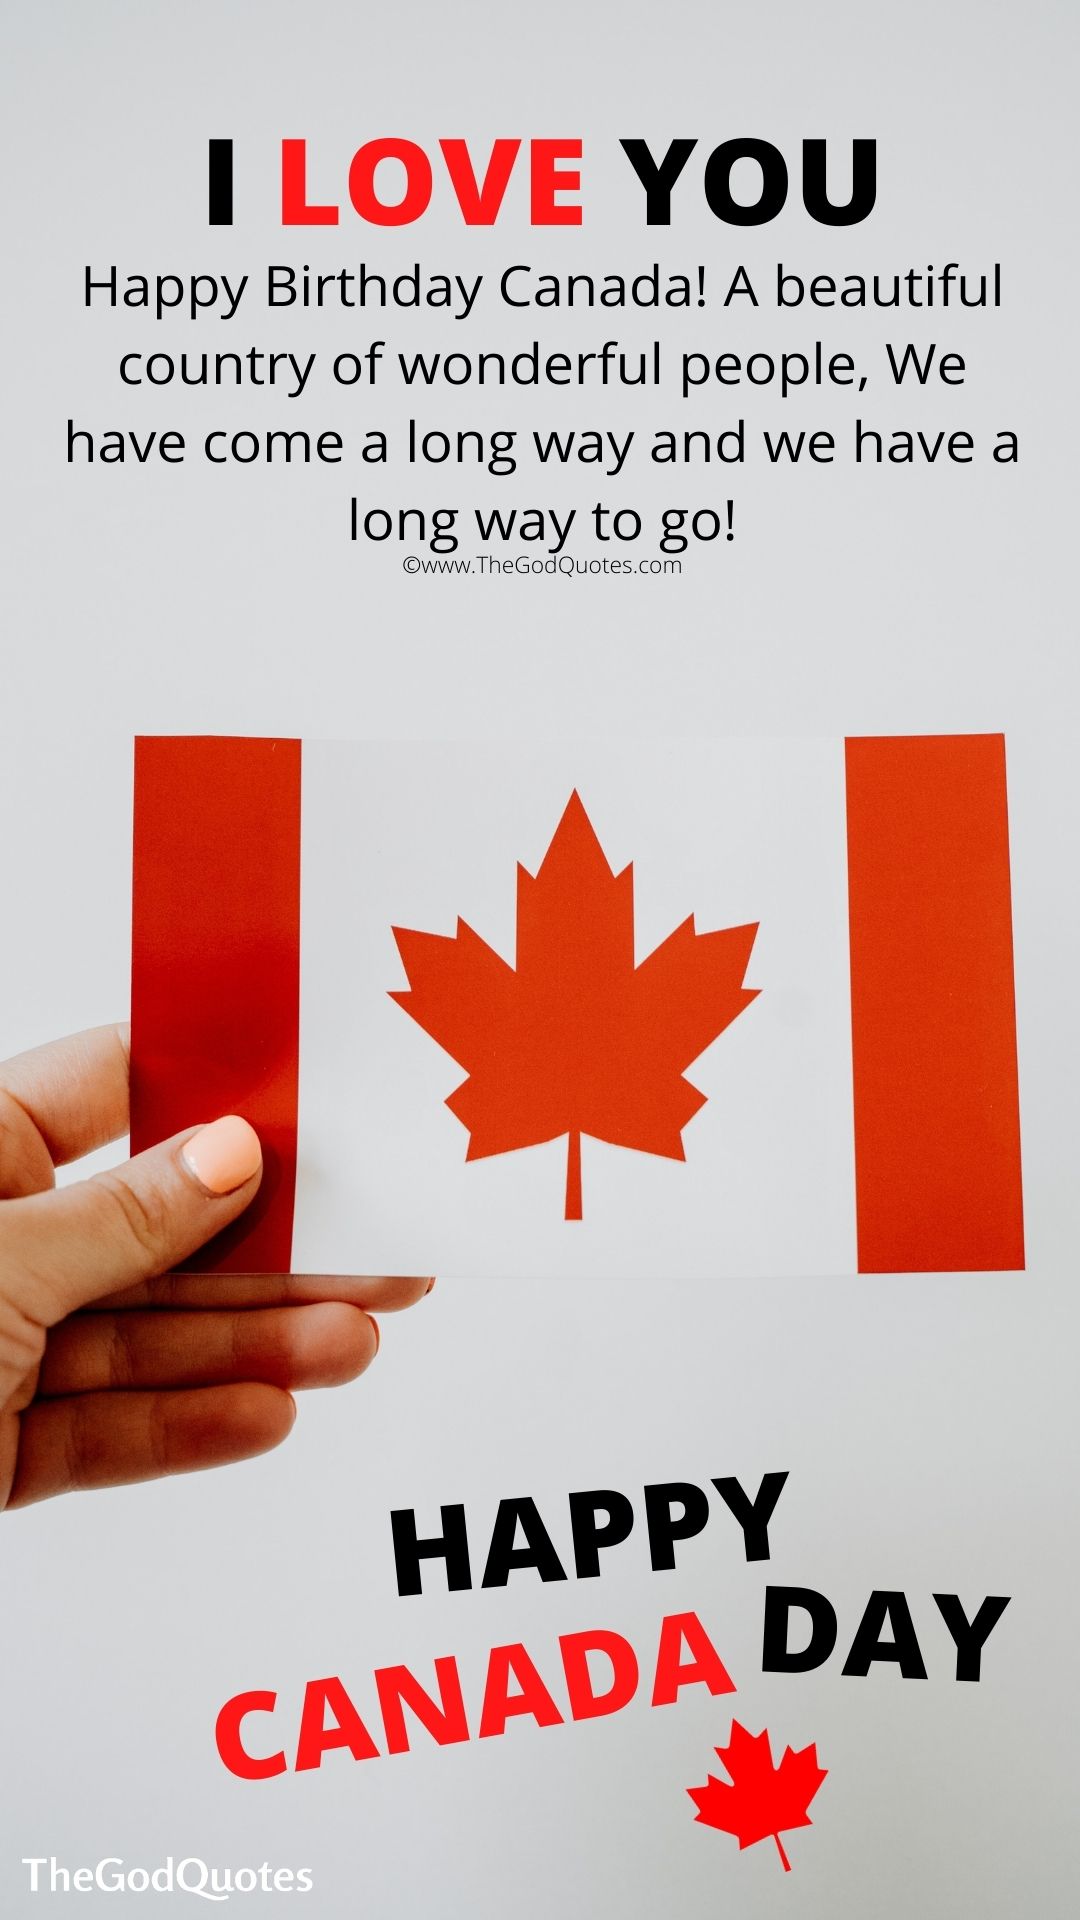 Happy Canada Day Images, Pictures, Photos, Poster, Pics, Wallpaper